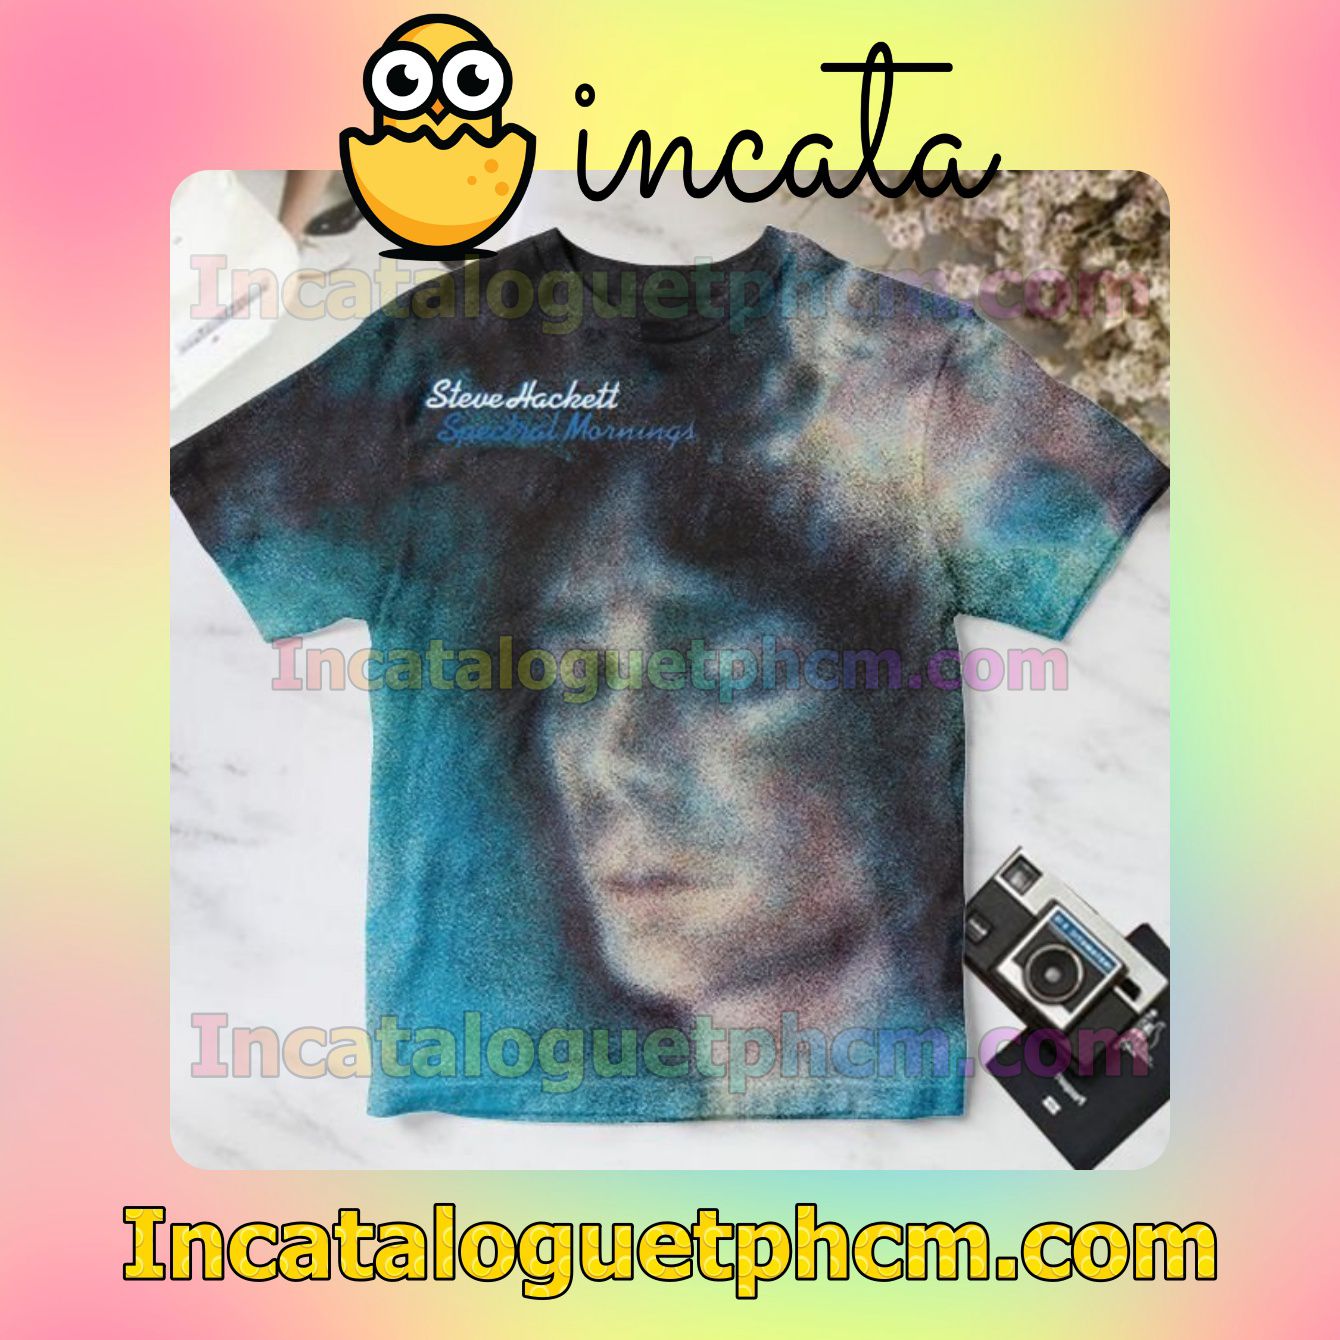 Spectral Mornings Album Cover By Steve Hackett Personalized Shirt